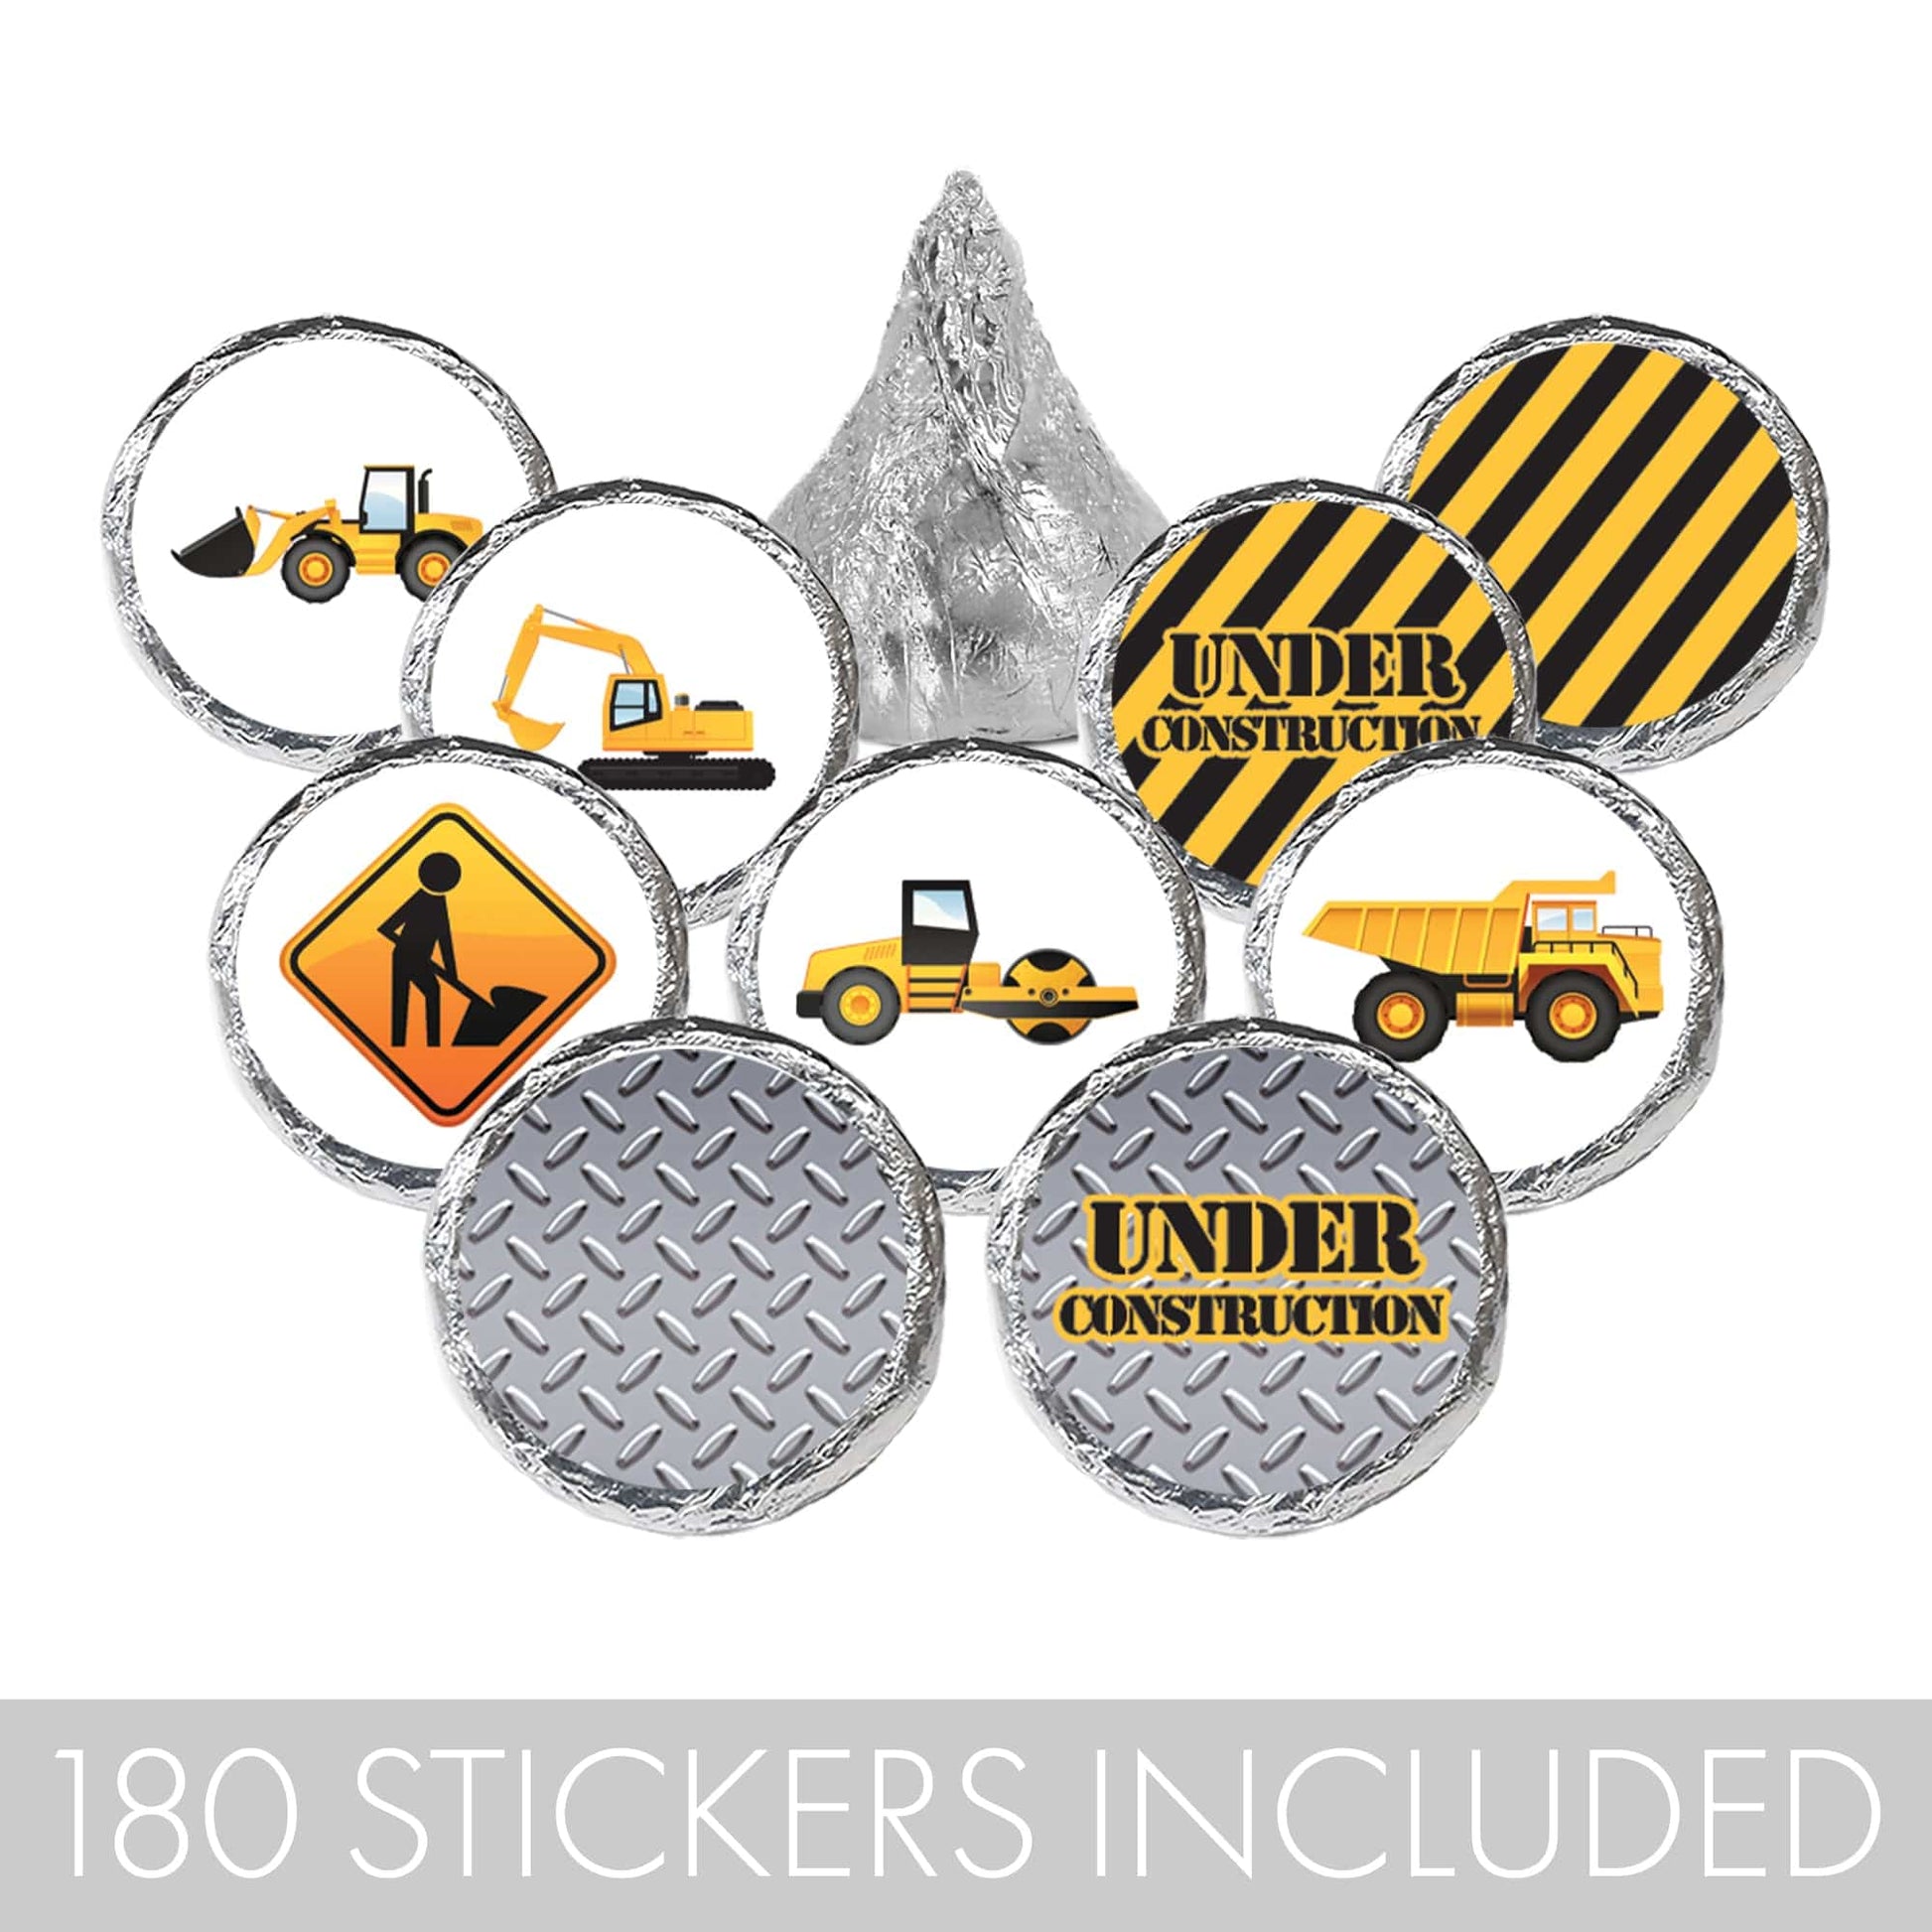 Under Construction Party Stickers - 180 Stickers